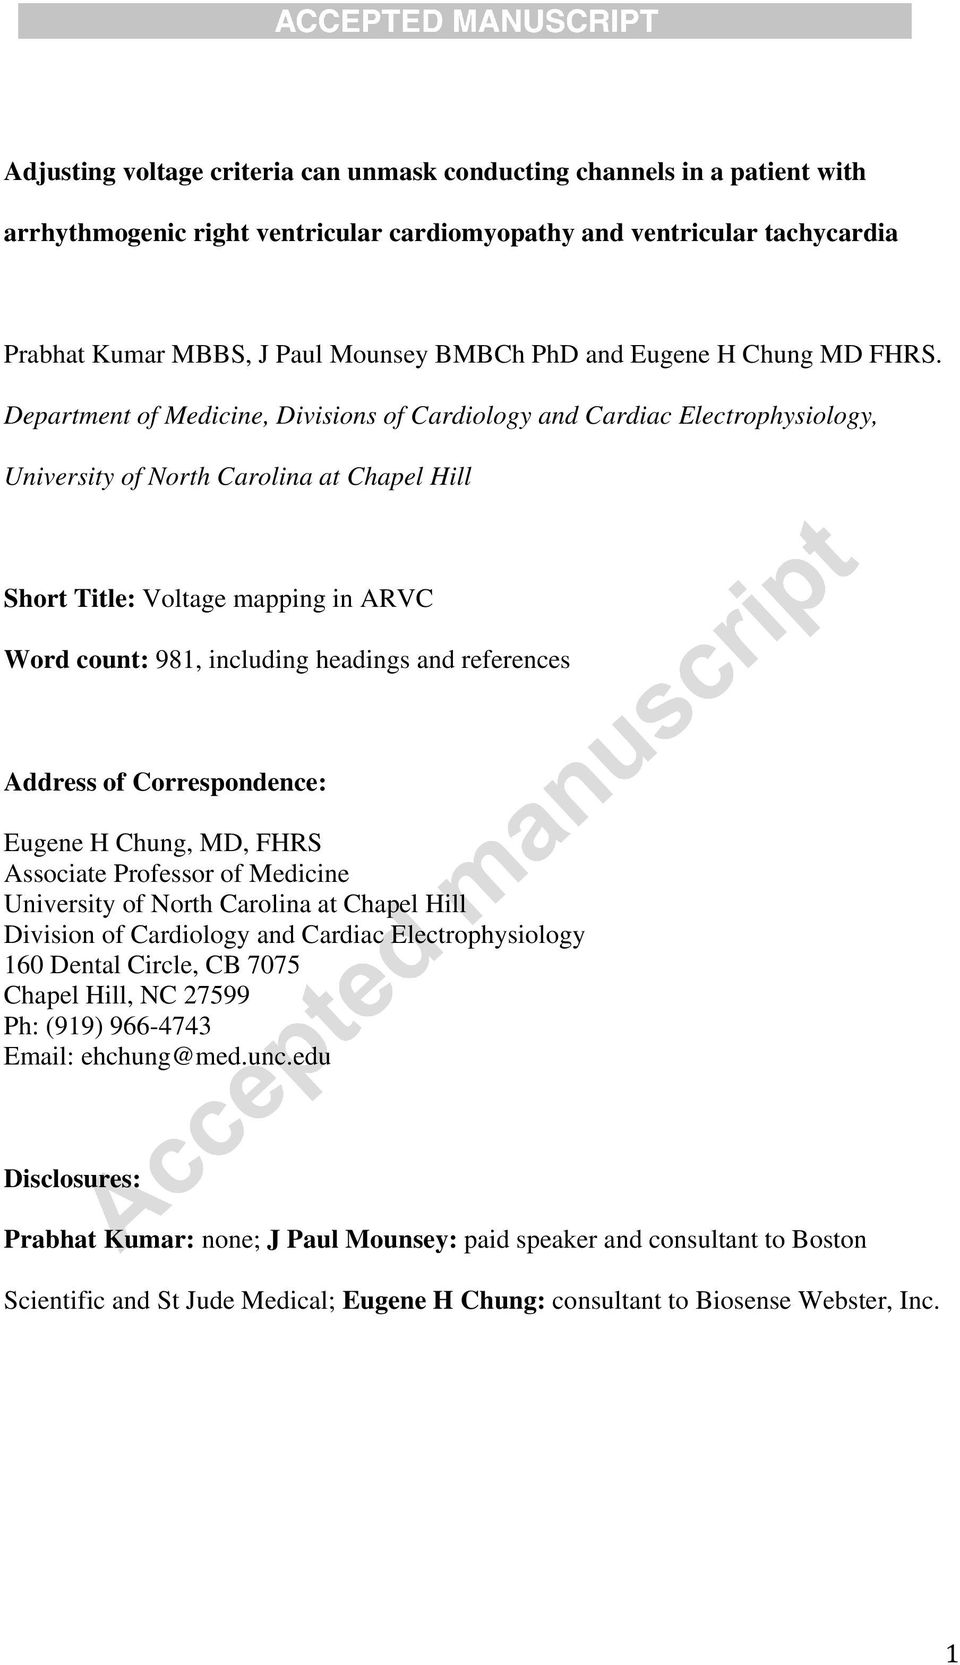 Department of Medicine, Divisions of Cardiology and Cardiac Electrophysiology, University of North Carolina at Chapel Hill Short Title: Voltage mapping in ARVC Word count: 981, including headings and